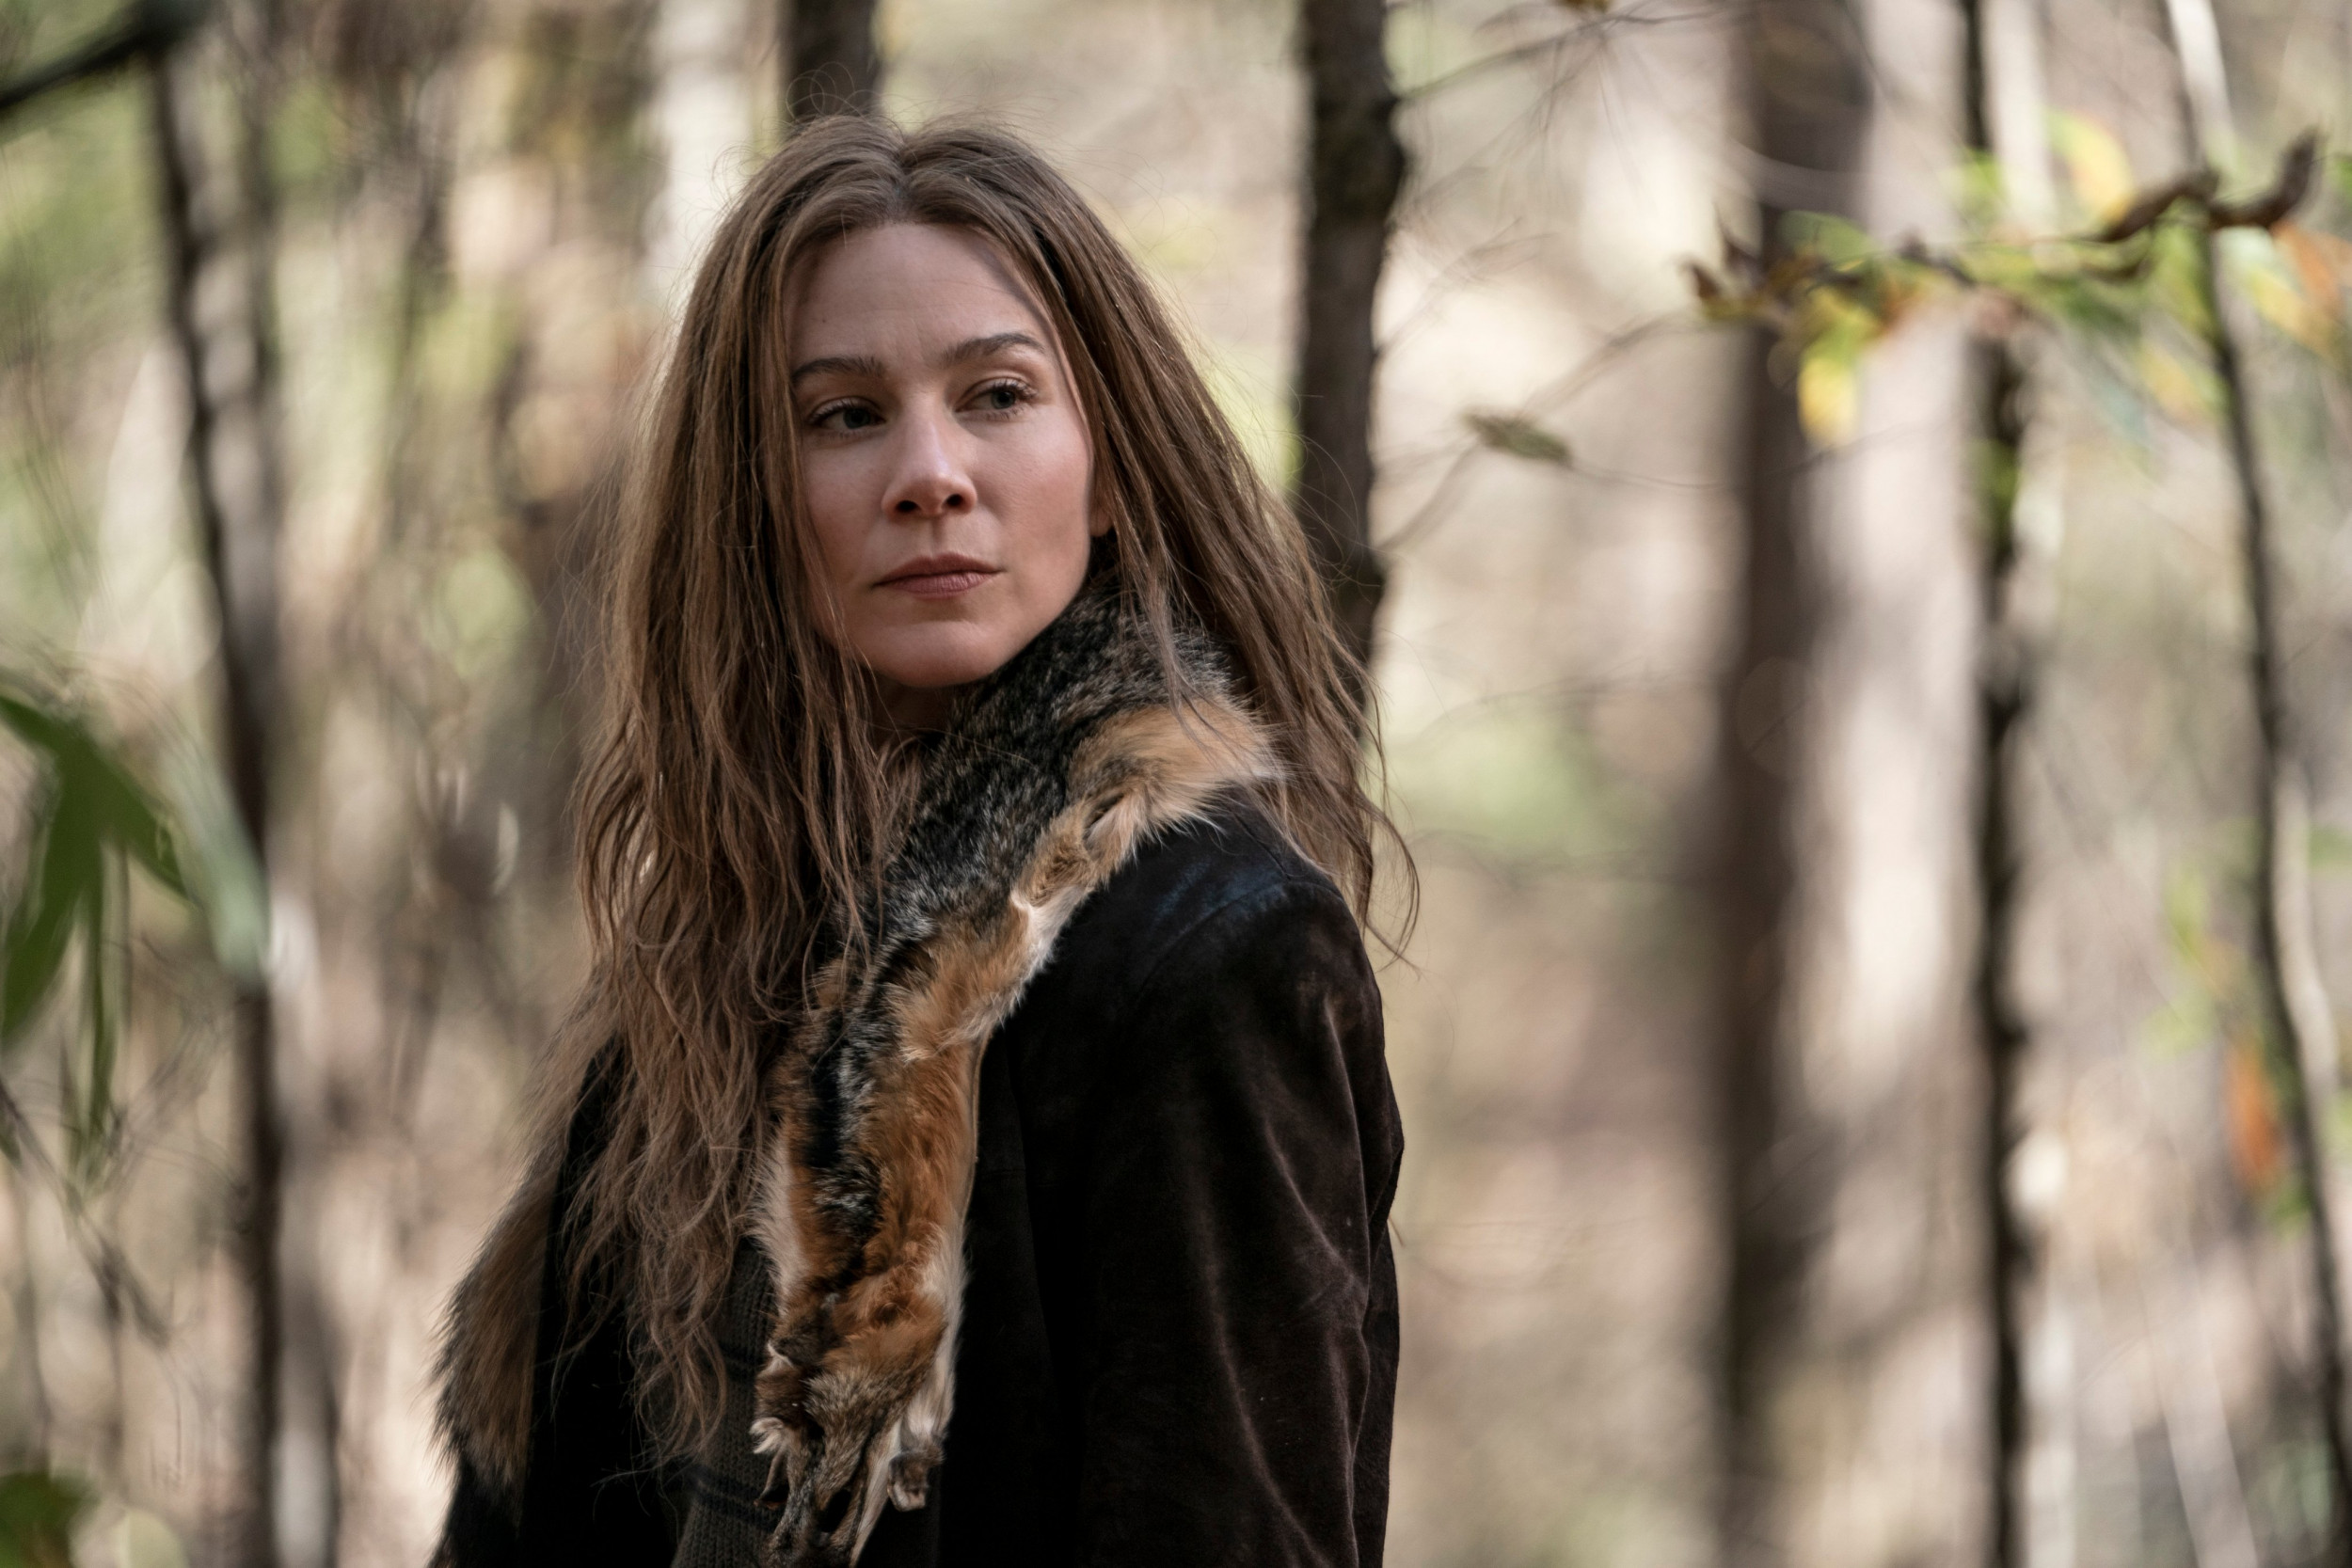 Eigenwijs Melbourne Wordt erger The Walking Dead' Season 10: Who is Leah and Who Plays Her?